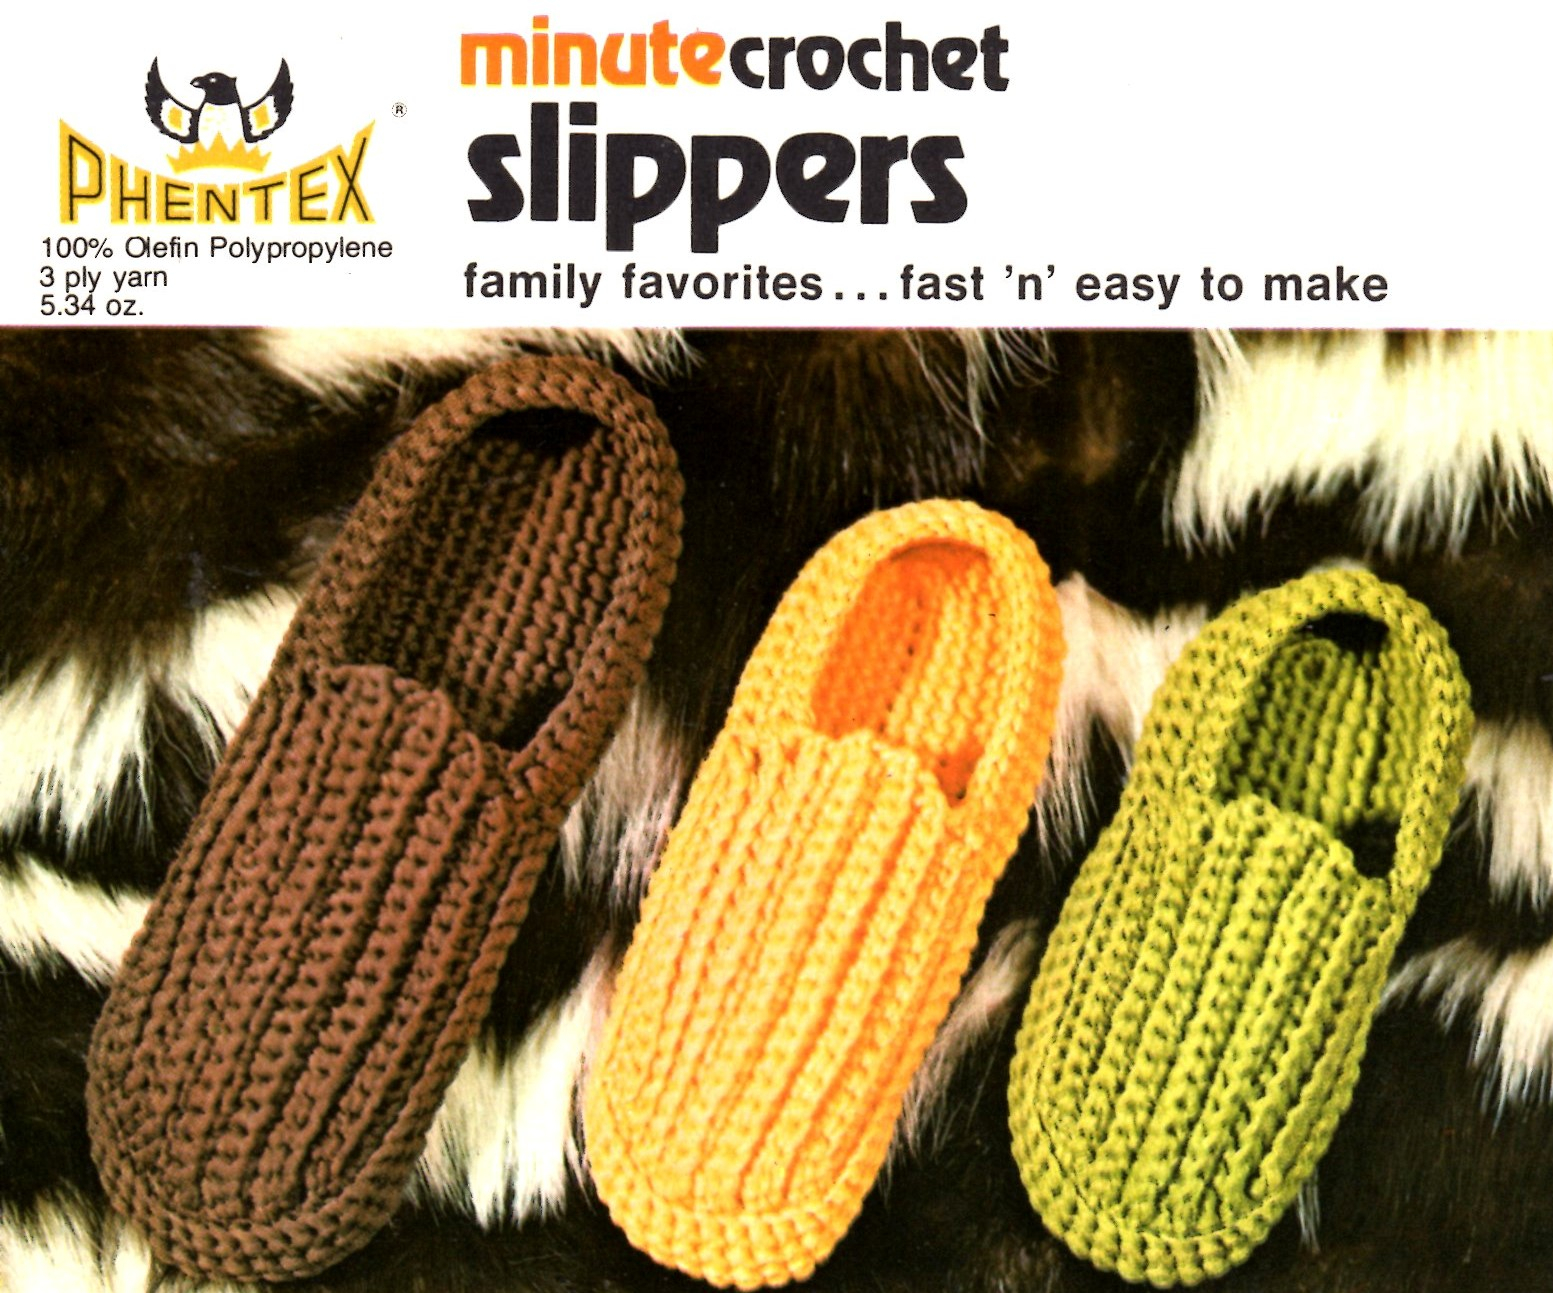 Crochet Shoes Pattern Minute Crochet Slippers For The Whole Family Fast And Easy To Make